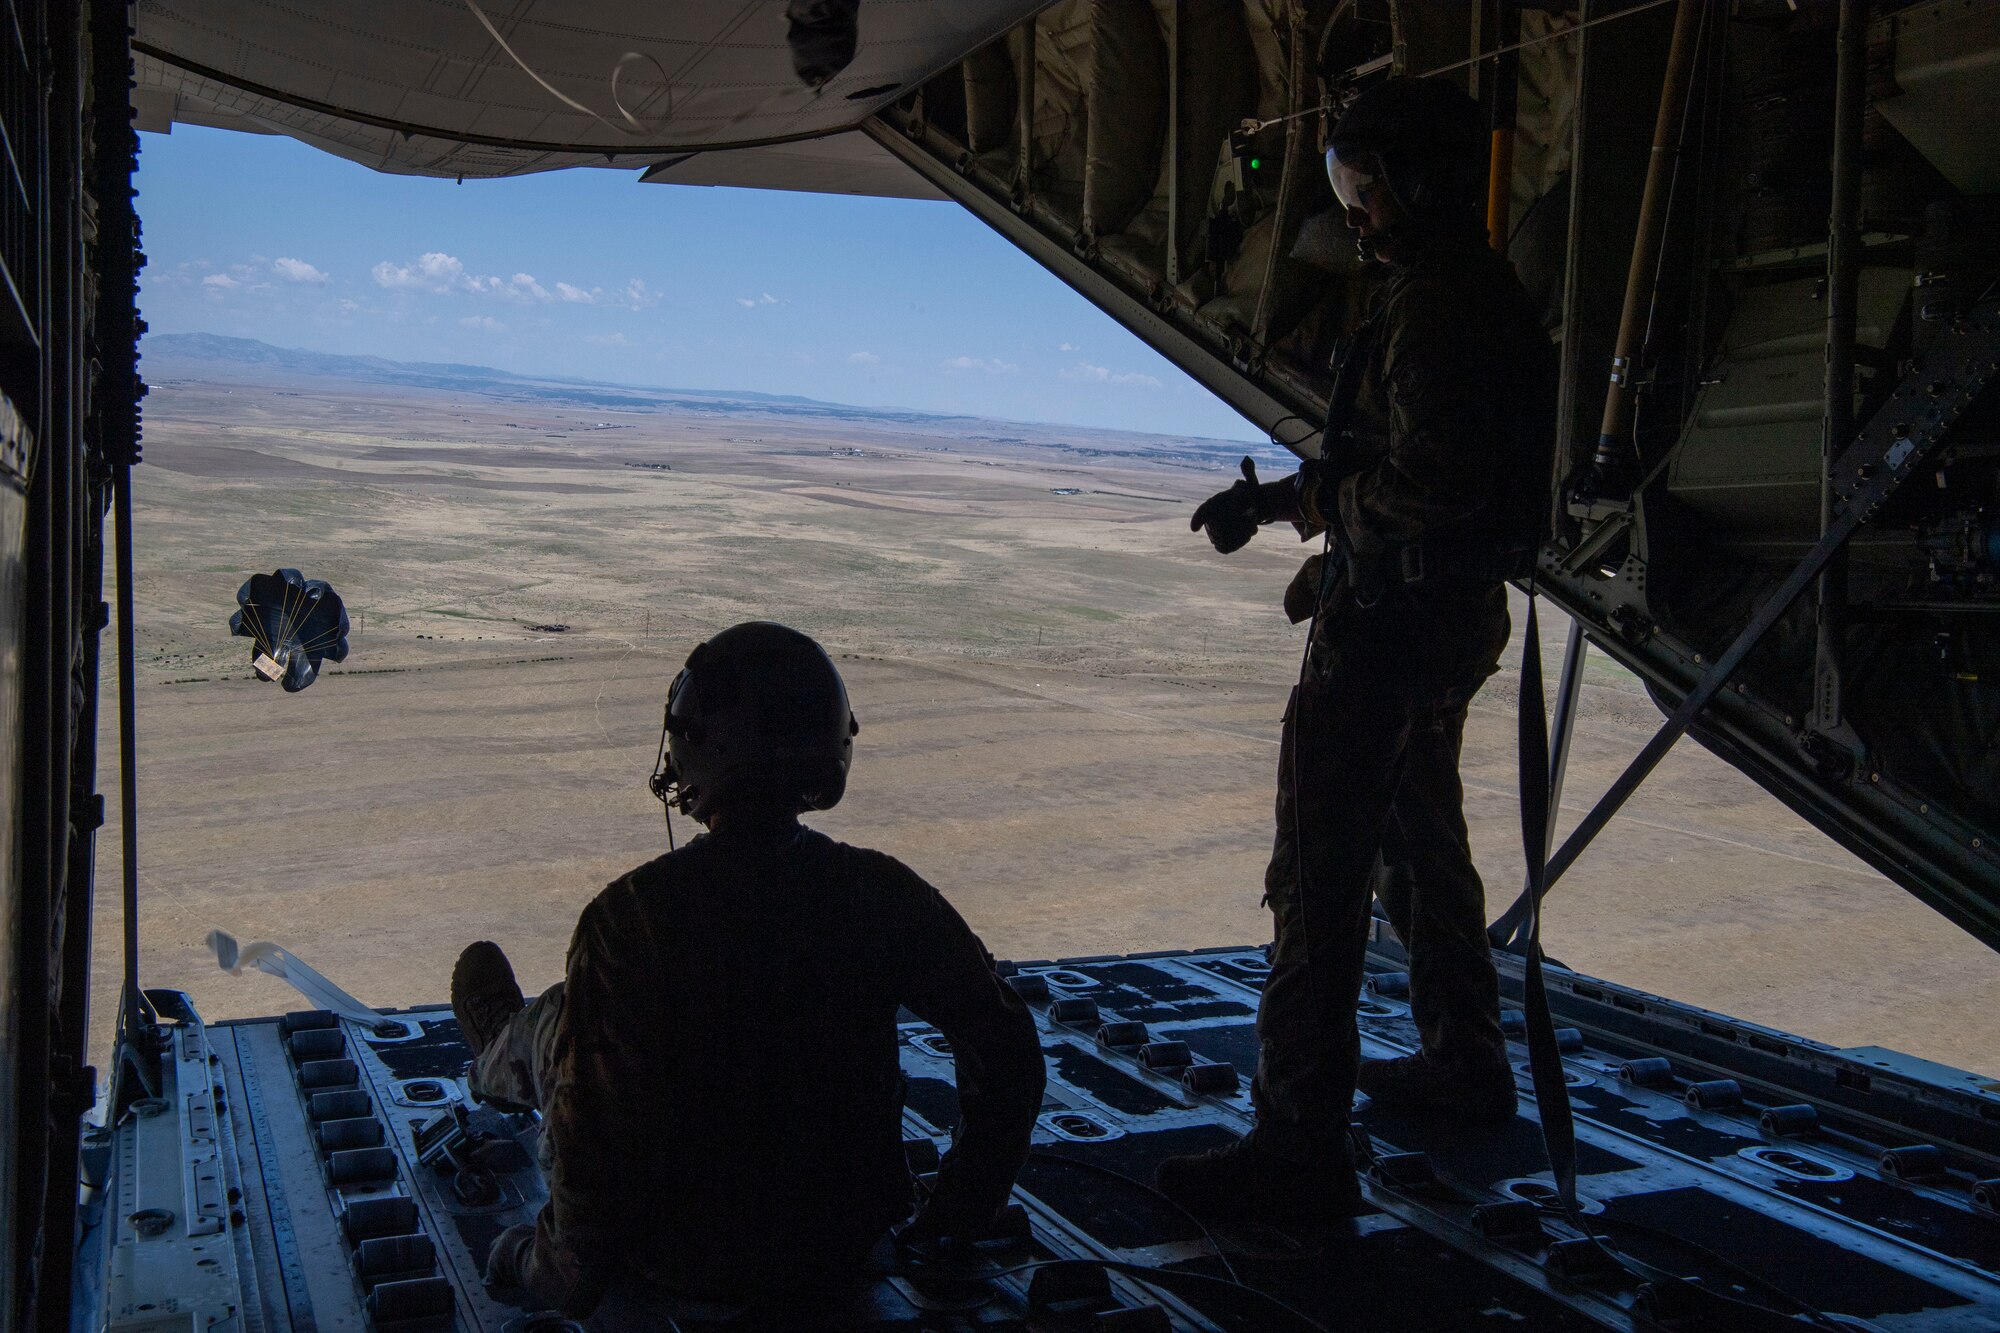 Airman 1st Class Cameron Bou (left) and Senior Airman Kirk Mumau (right), 41st Airlift Squadron loadmasters, conduct an airdrop over Reed Drop Zone in Colorado July 27, 2020. This training is part of the 4/12 deployment initiative, which was developed in 2019 between airlift squadrons from Dyess Air Force Base, Texas and Little Rock AFB, allowing each squadron a full year of dwell time followed by a four-month rotation to their respective area of responsibility. (U.S. Air Force photo by Airman 1st Class Aaron Irvin)